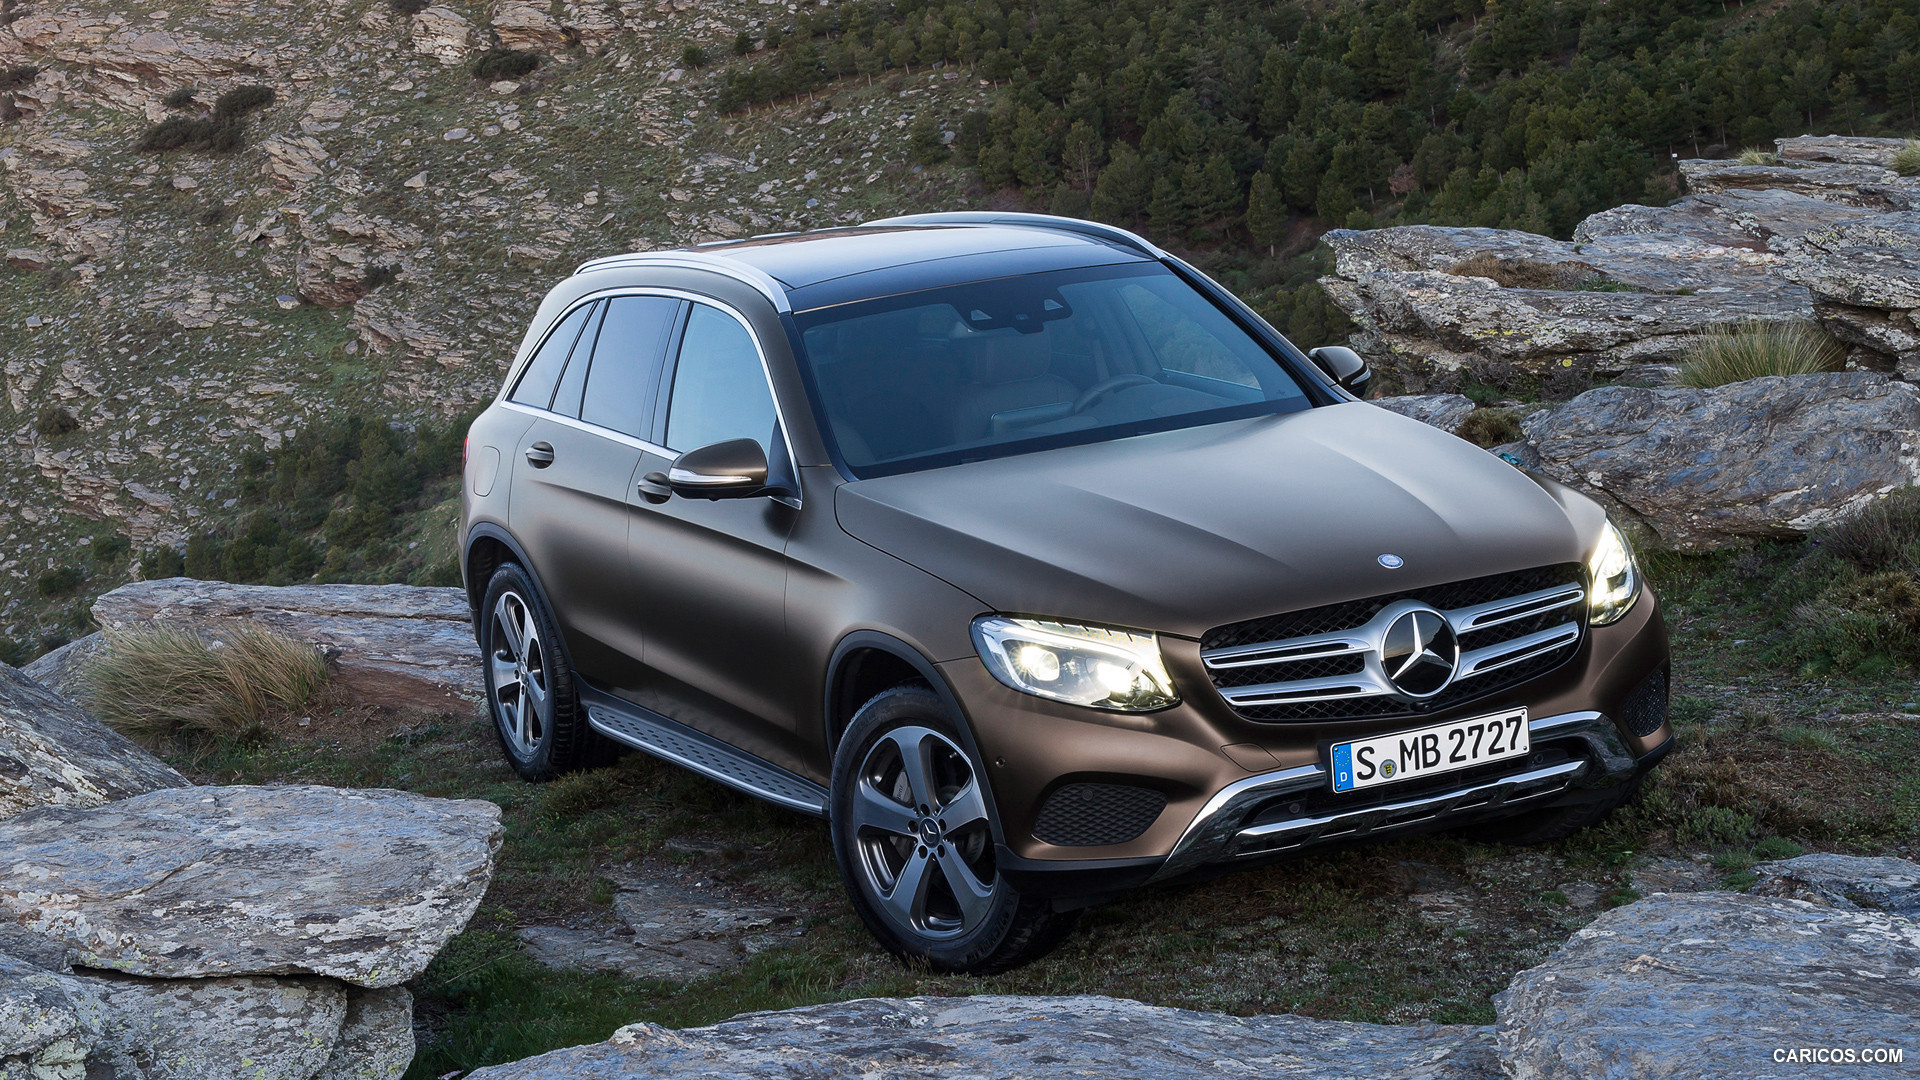 2016 Mercedes-Benz GLC-Class GLC 250d 4MATIC (Citrine Brown Magno, Offroad Line) - Front, #24 of 254